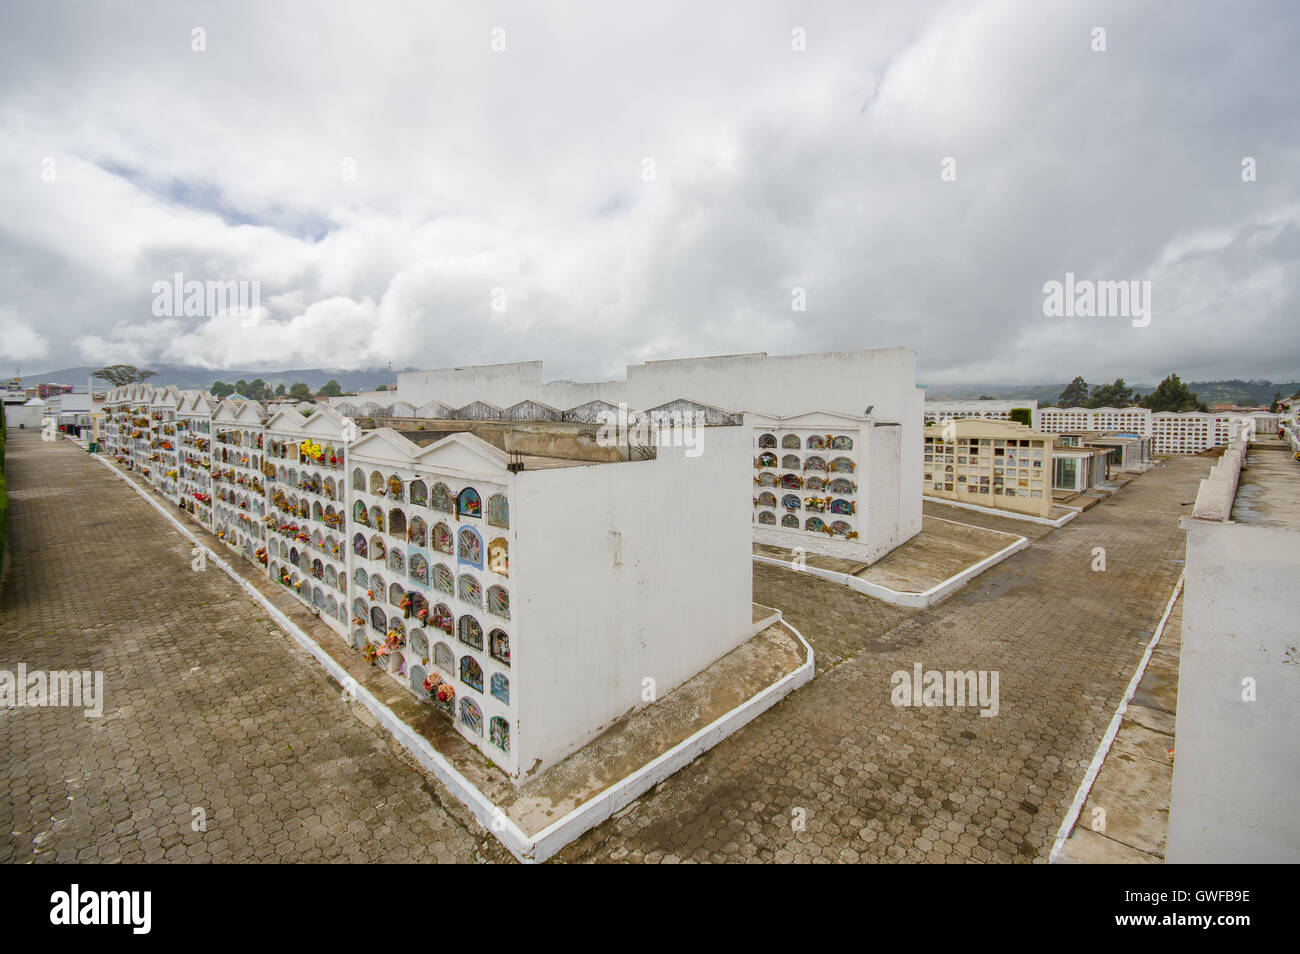 TULCAN, ECUADOR - JULY 3, 2016: overview of the city cemetery with lot of vertical graves and paths Stock Photo